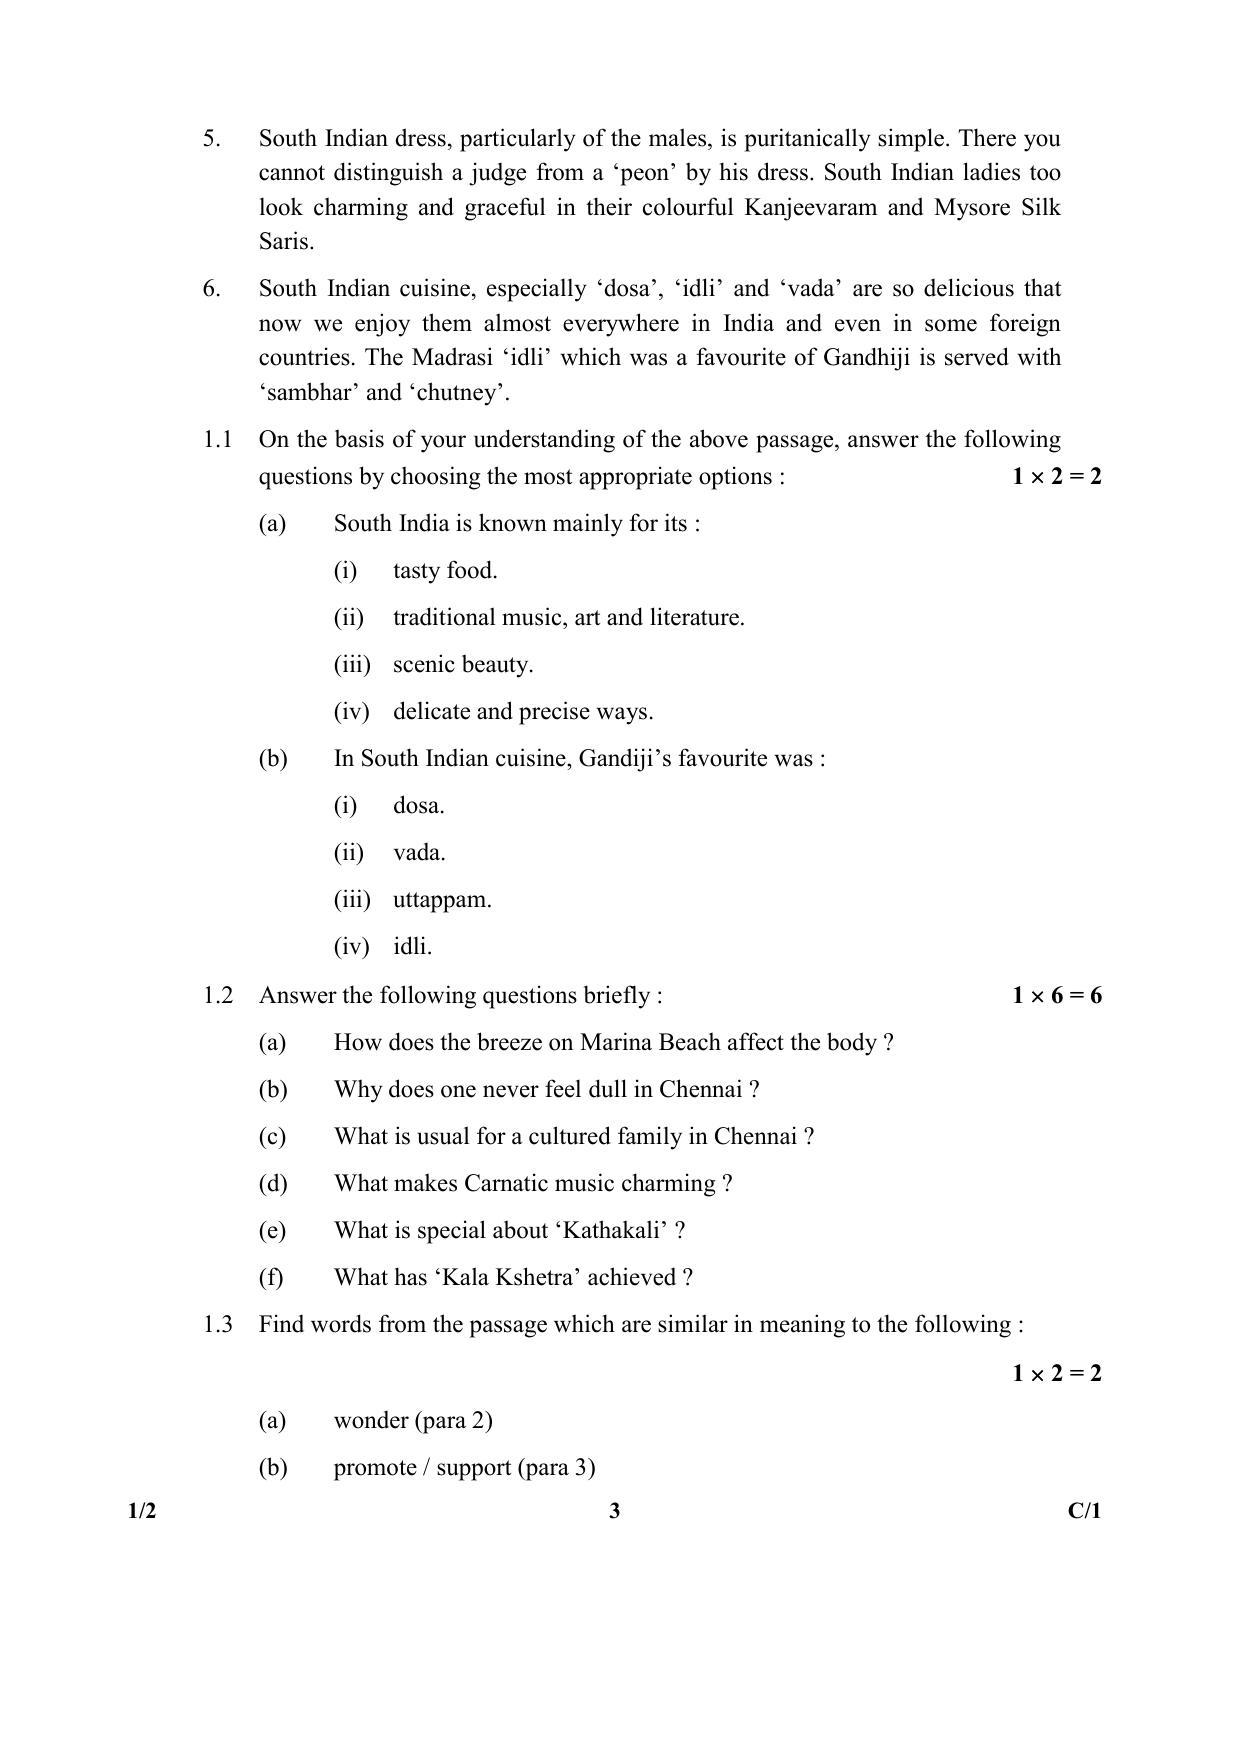 CBSE Class 12 1-2(English Core) 2018 Compartment Question Paper - Page 3